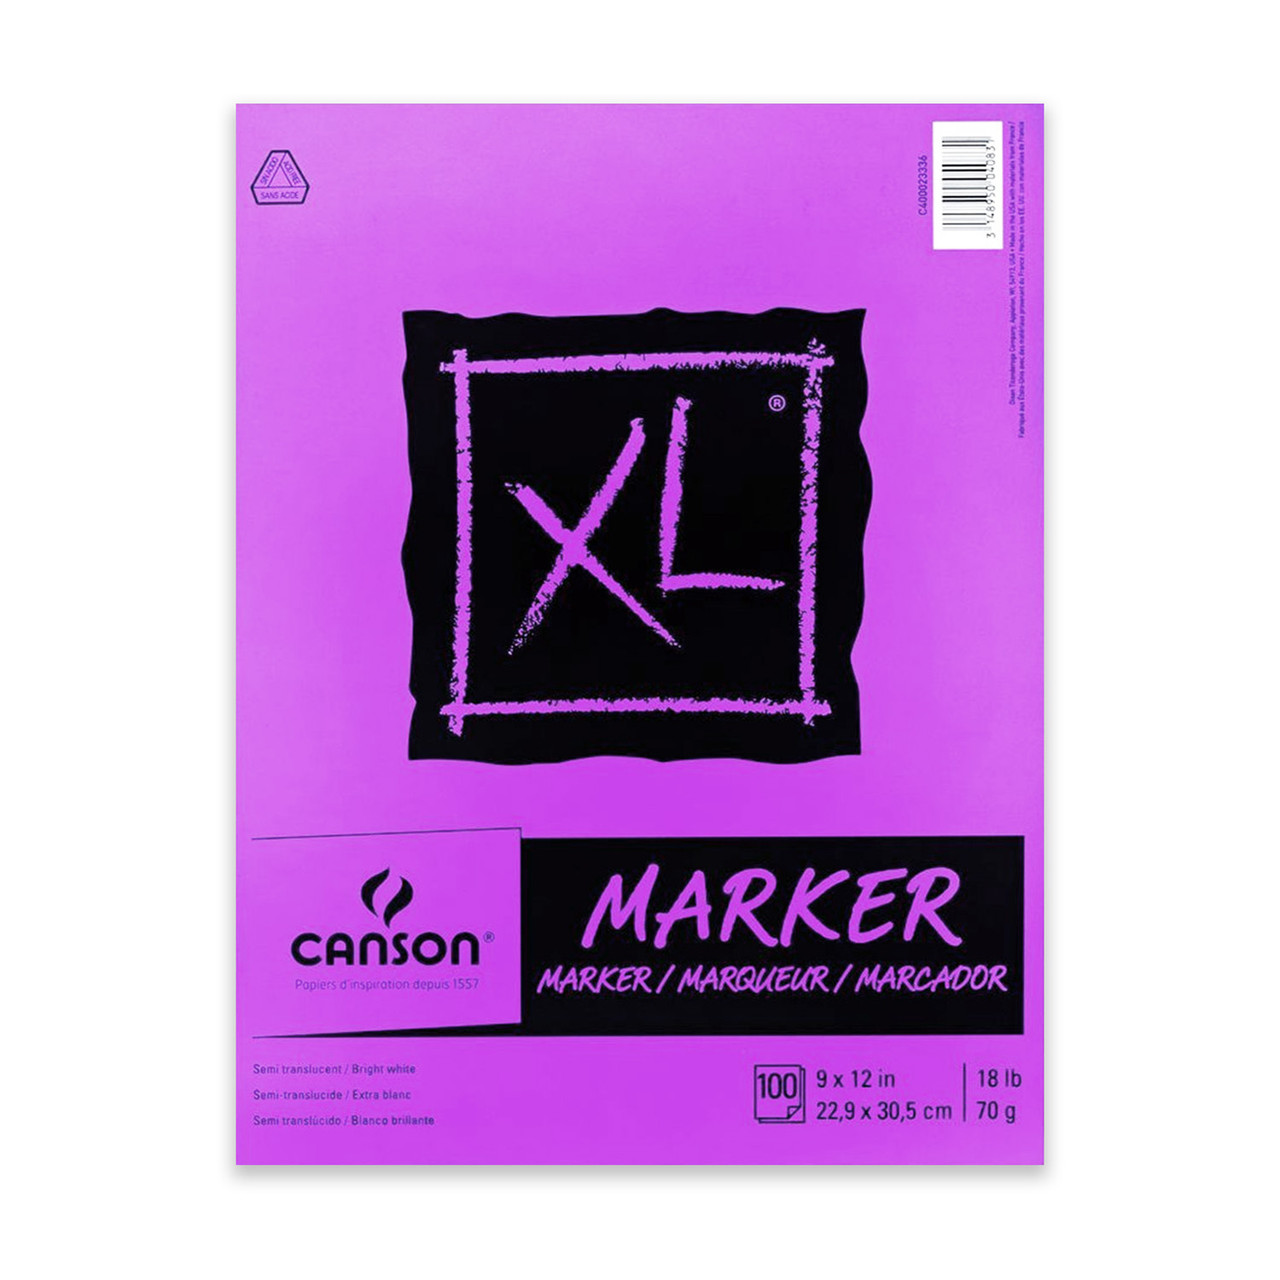 DRAWING - Canson Pro Layout Marker Paper, 9 x 12